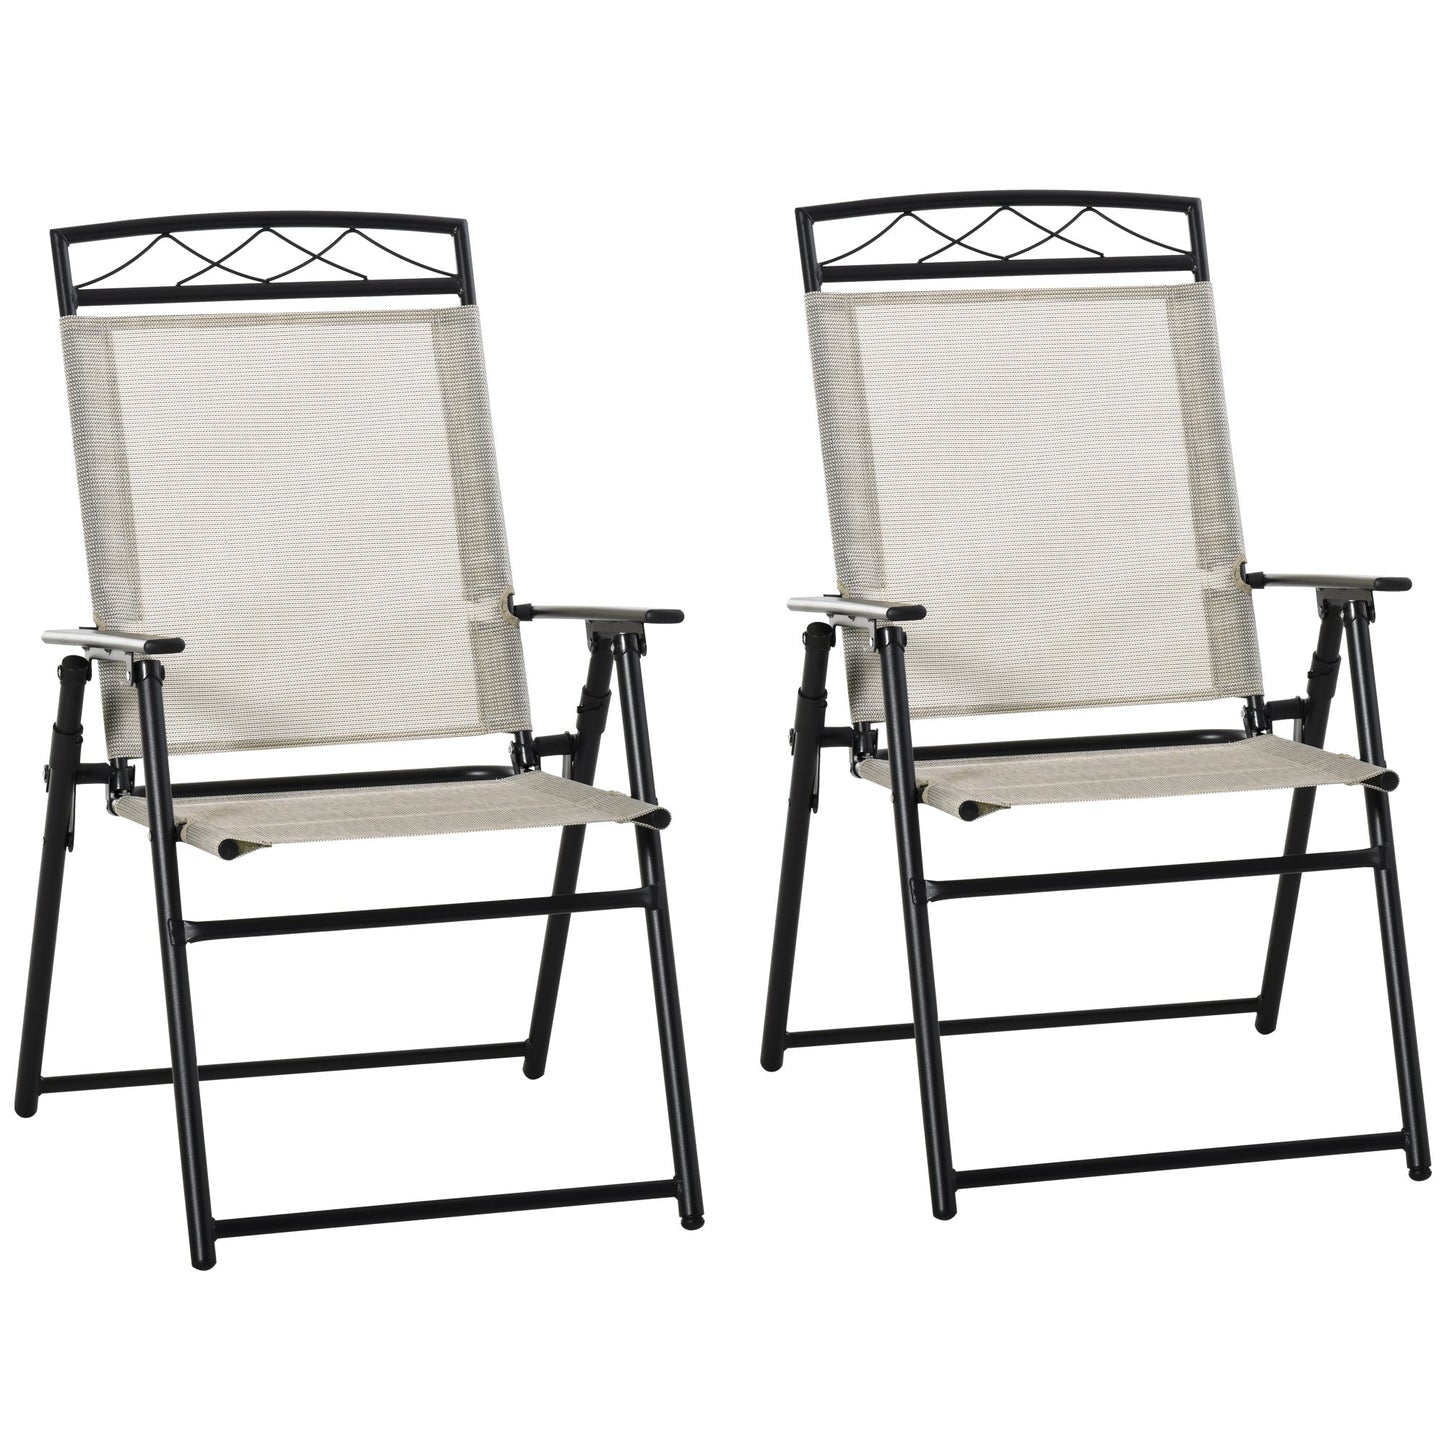 Outsunny Outdoor Chairs Set of 2 Foldable w/ Texteline Fabric for Garden Balcony Poolside